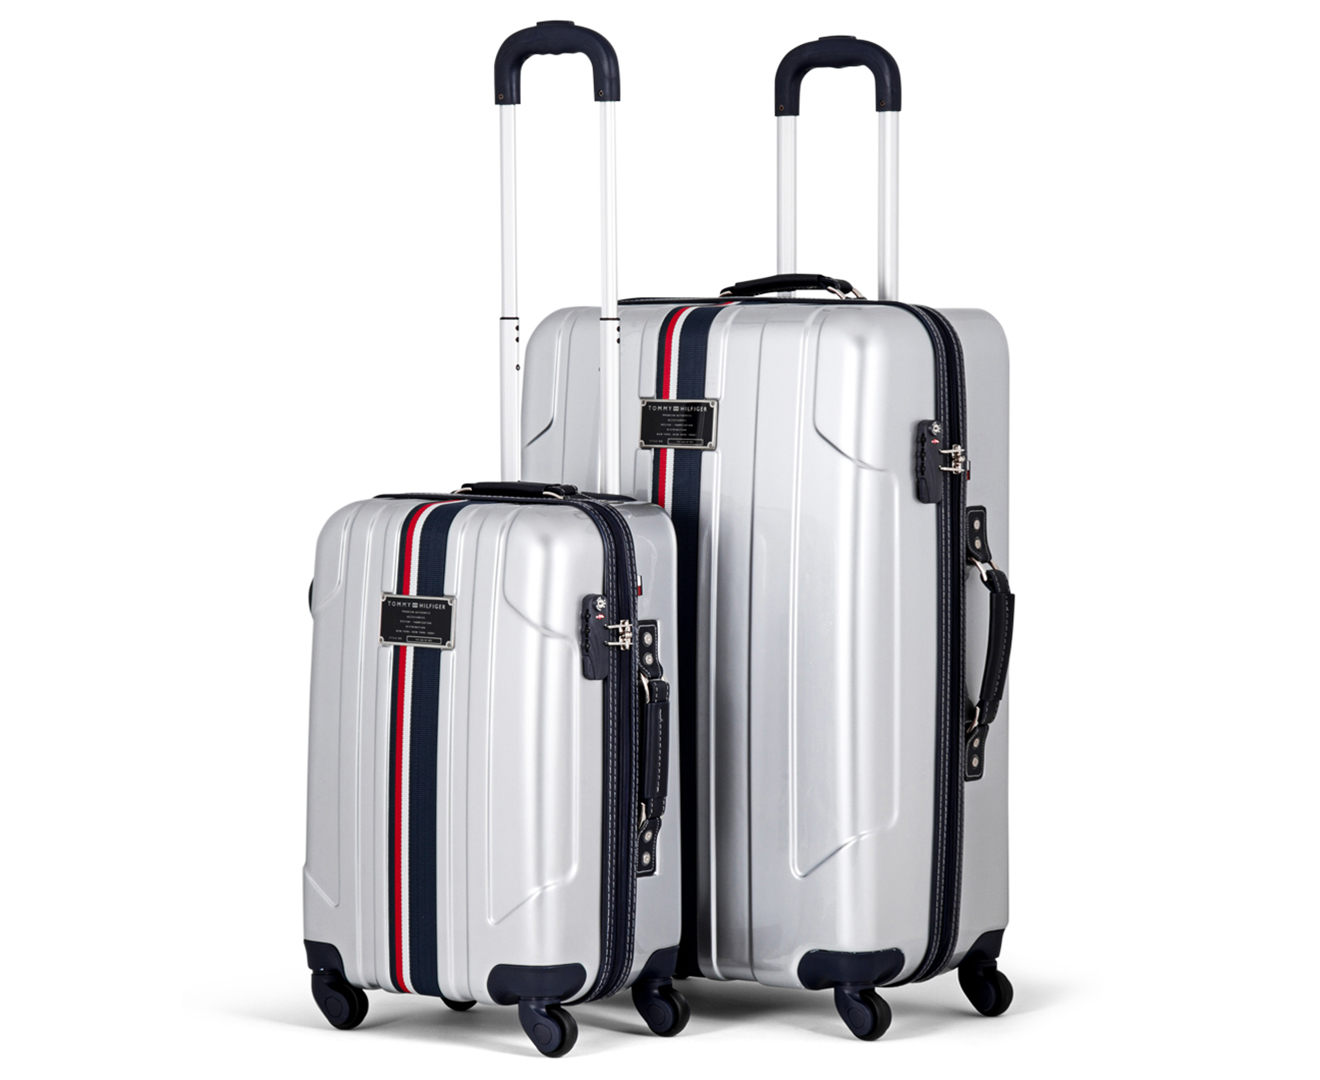 Travelmate Deluxe 3 Piece Luggage Set - Giobags